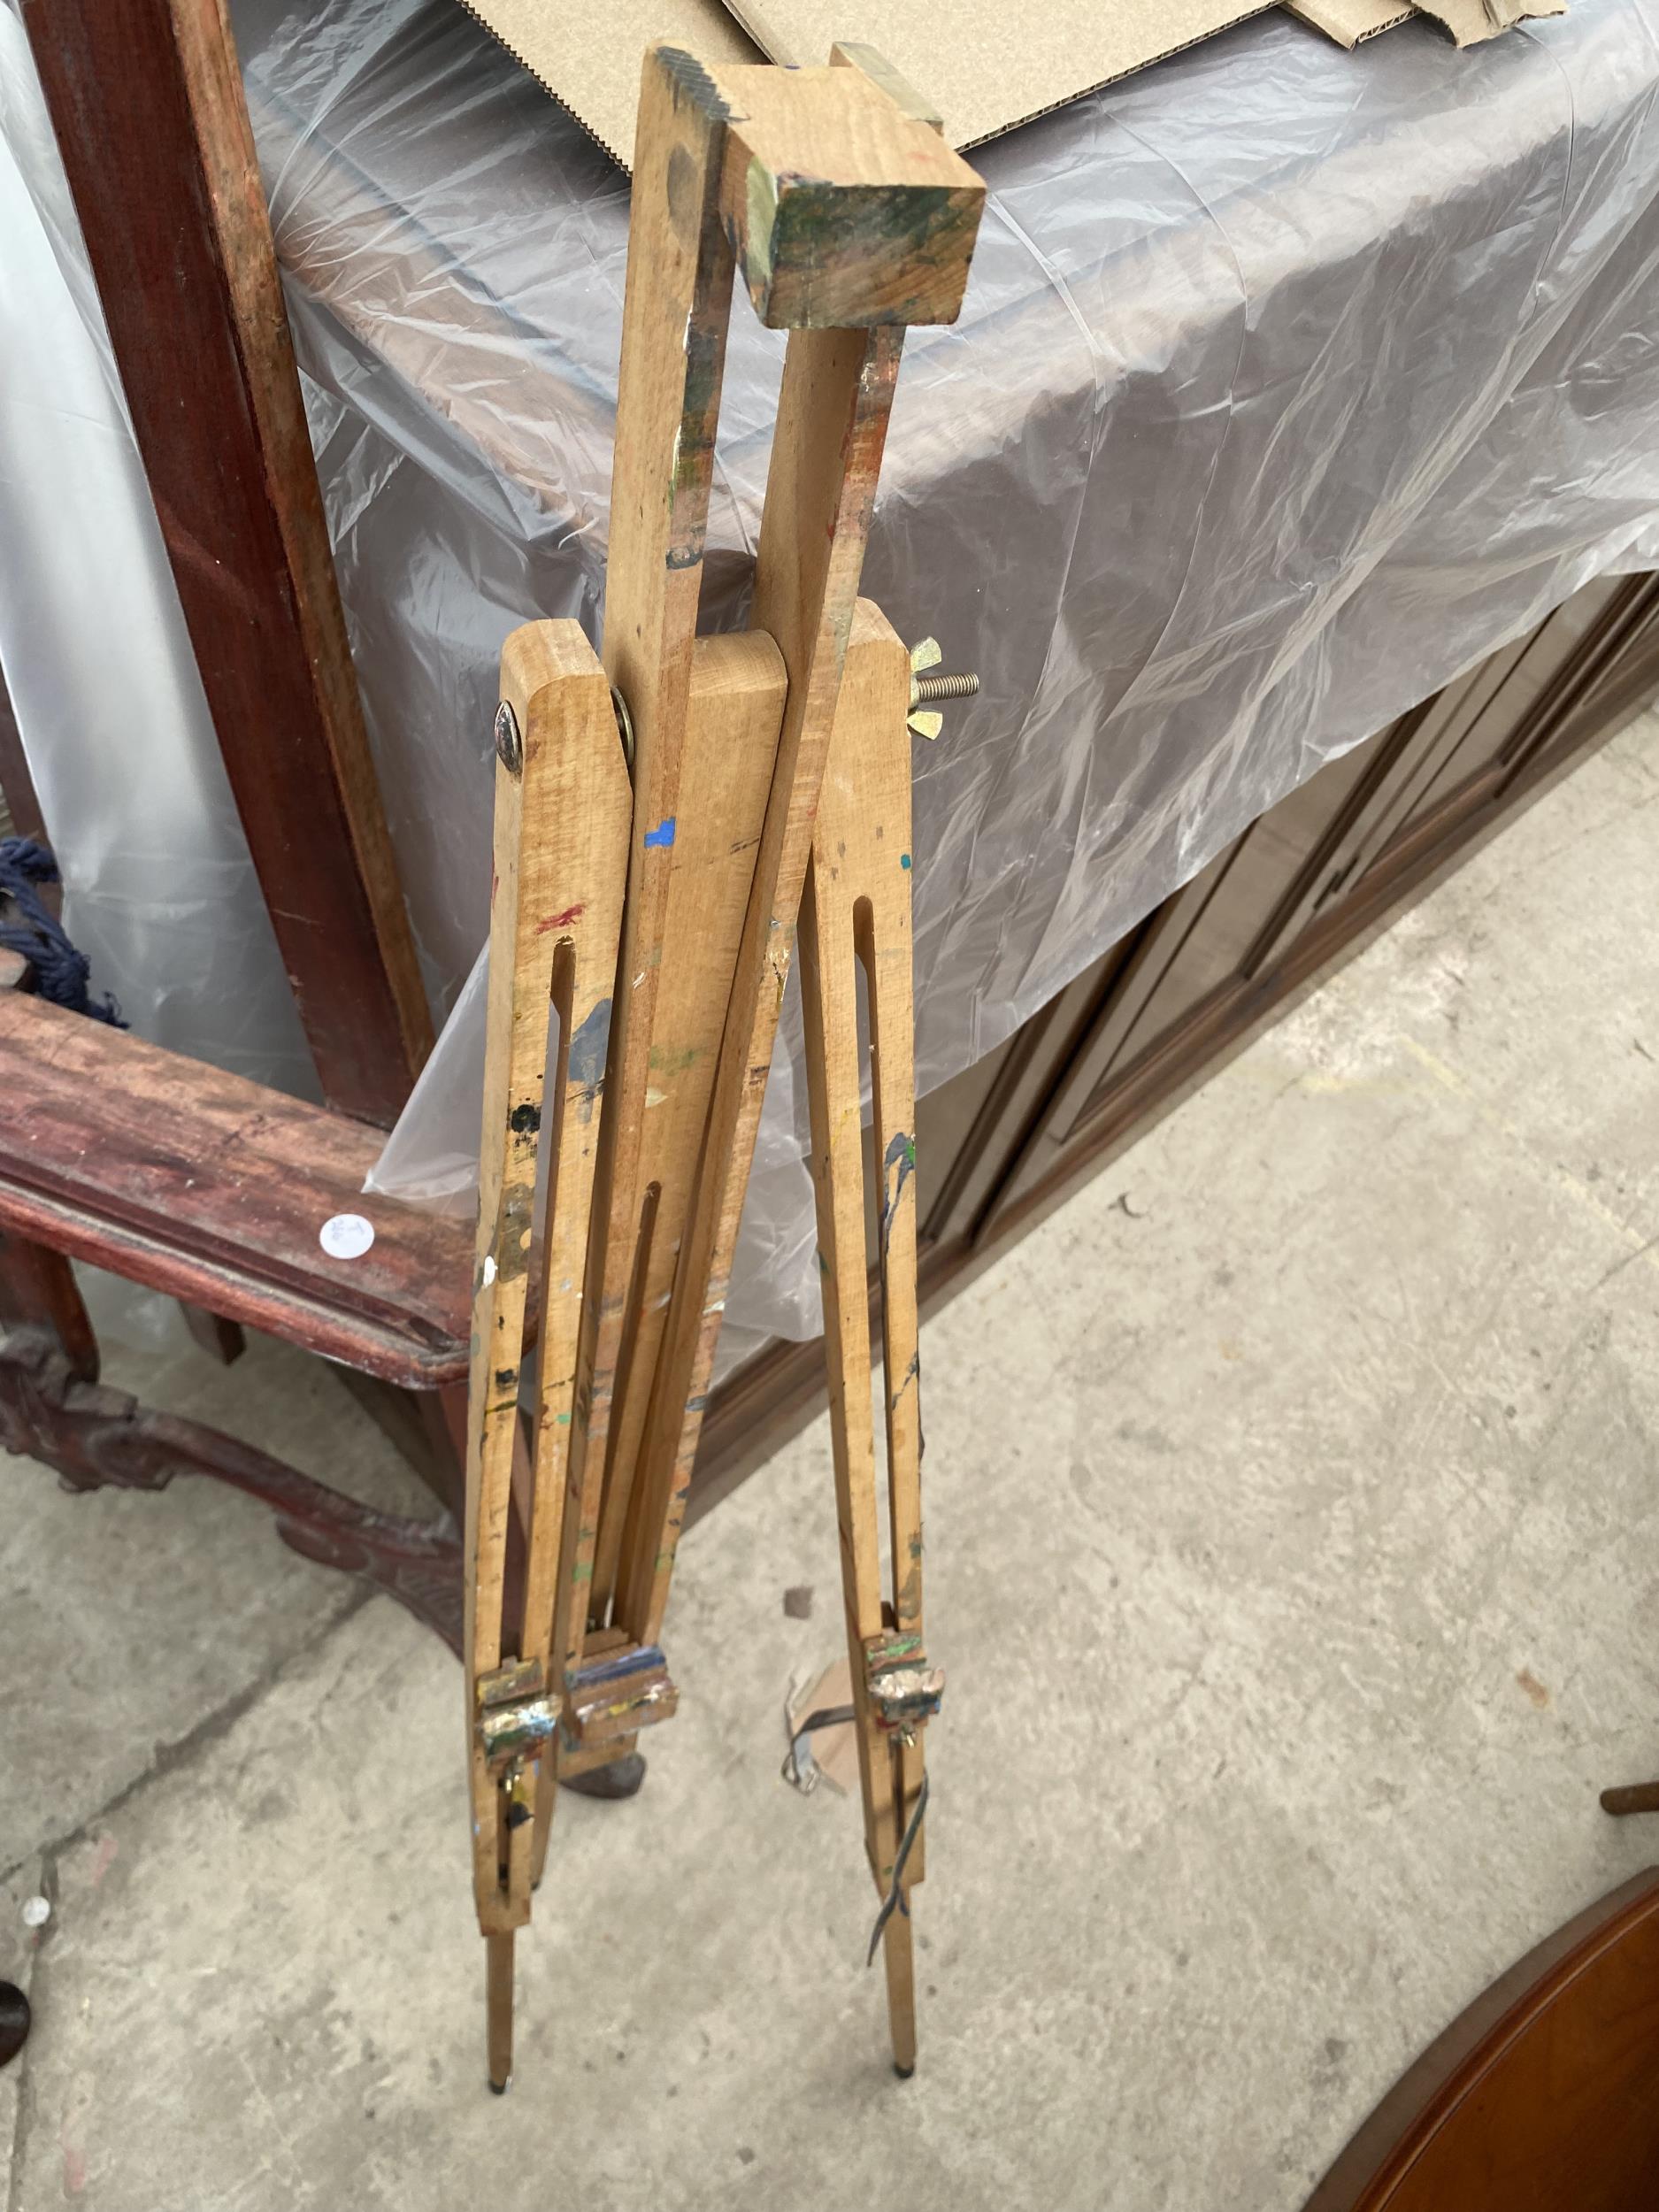 A VICTORIAN STYLE EASEL AND A SMALL MODERN EASEL - Image 4 of 6